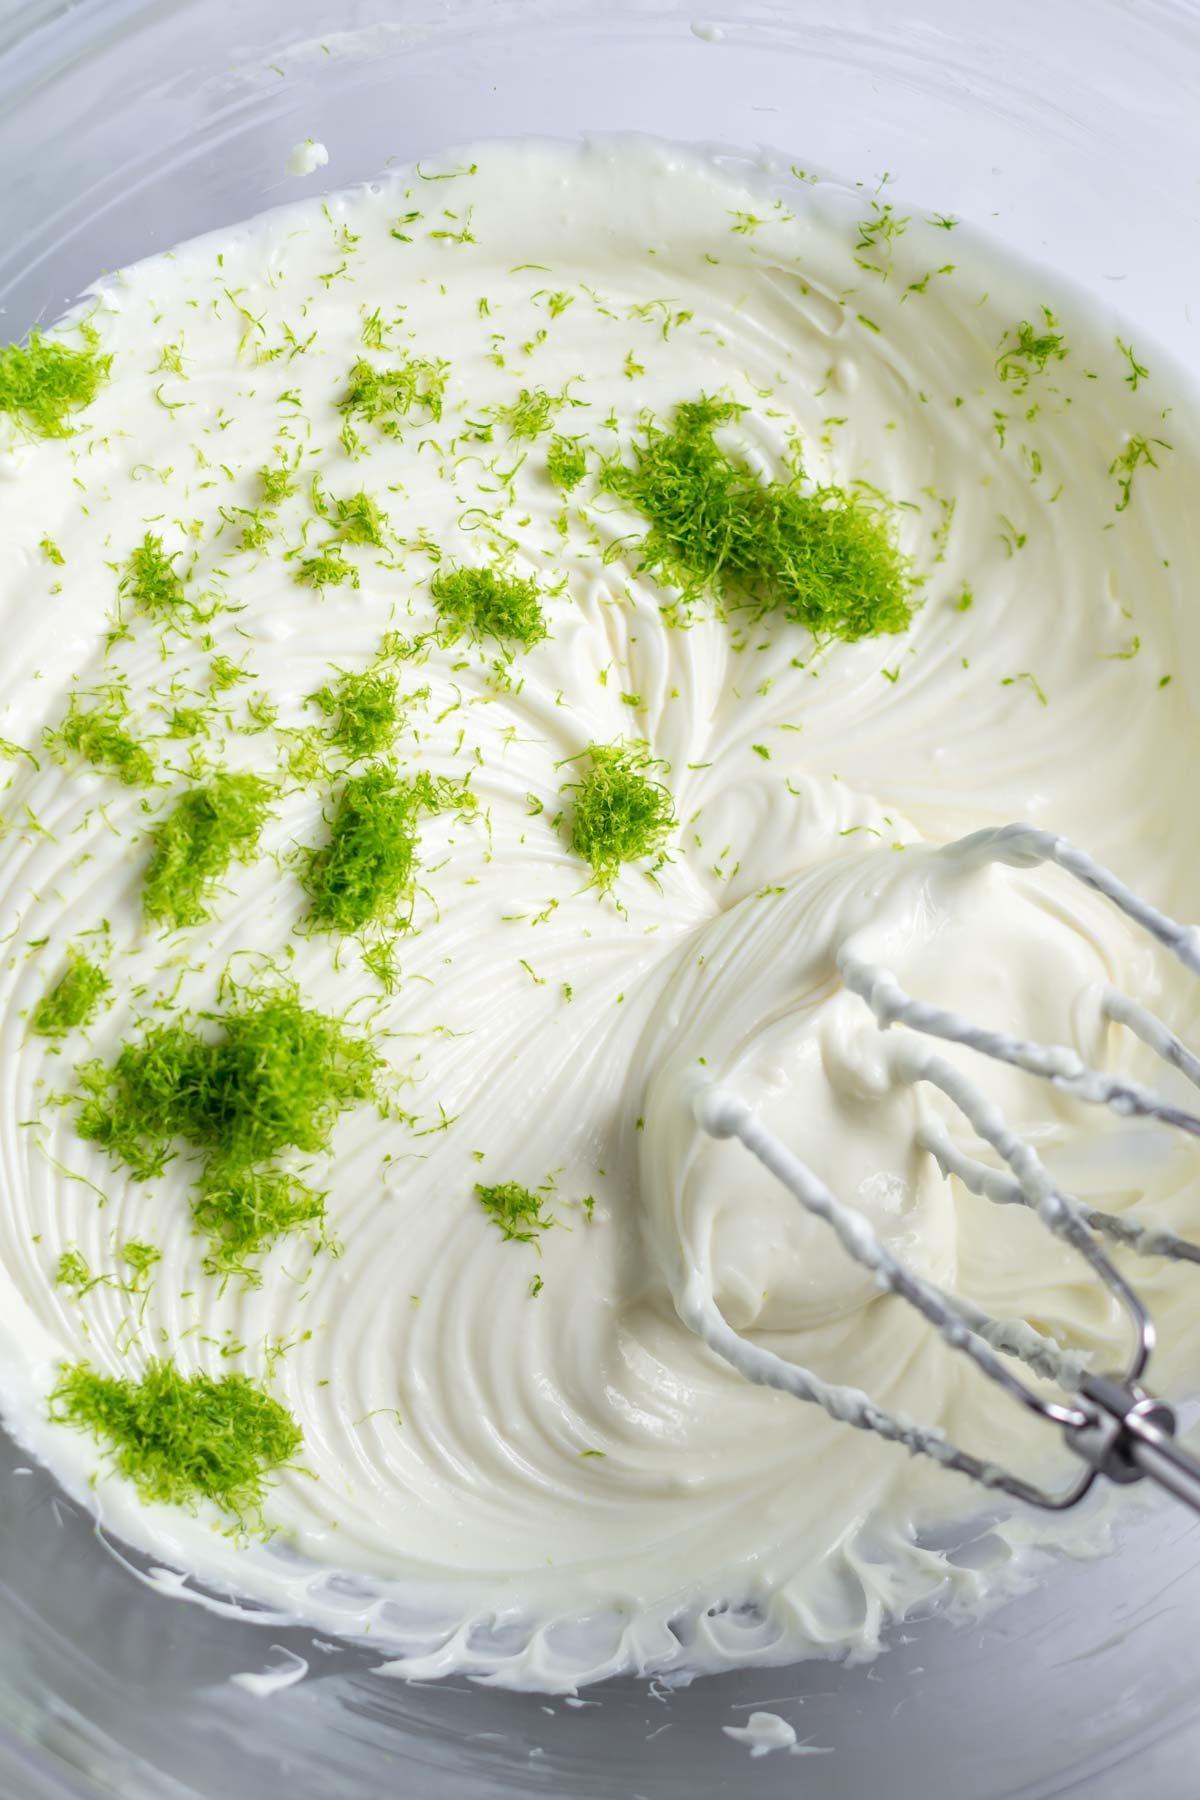 lime zest and juice added to the key lime cheesecake filling